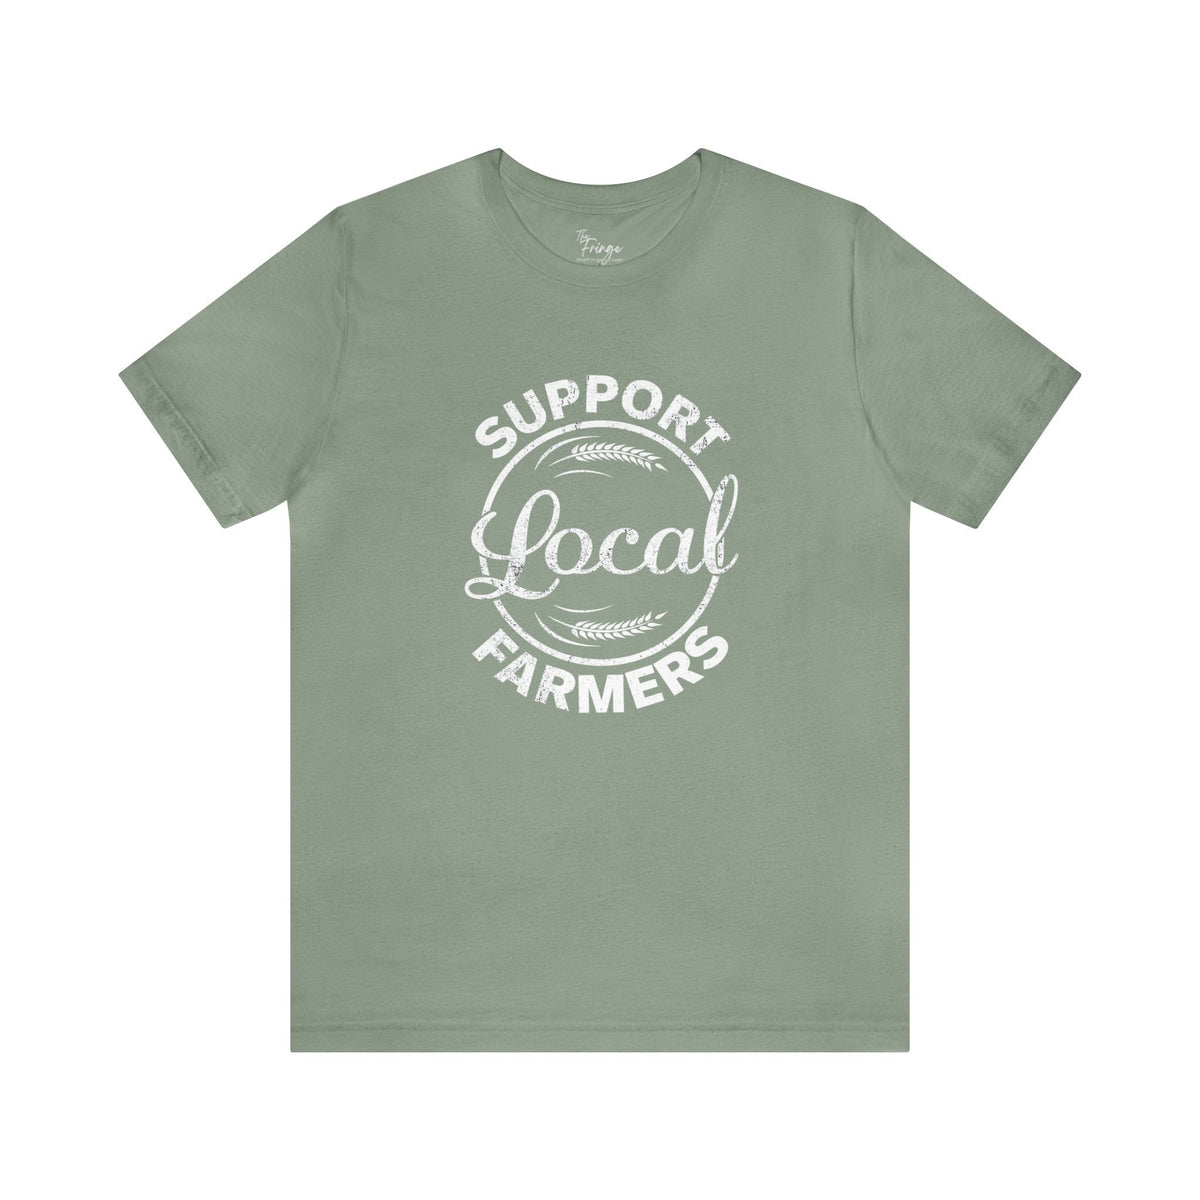 Support Local Farmers Tee | Country Graphic Tee | Western T-shirt T-Shirt TheFringeCultureCollective